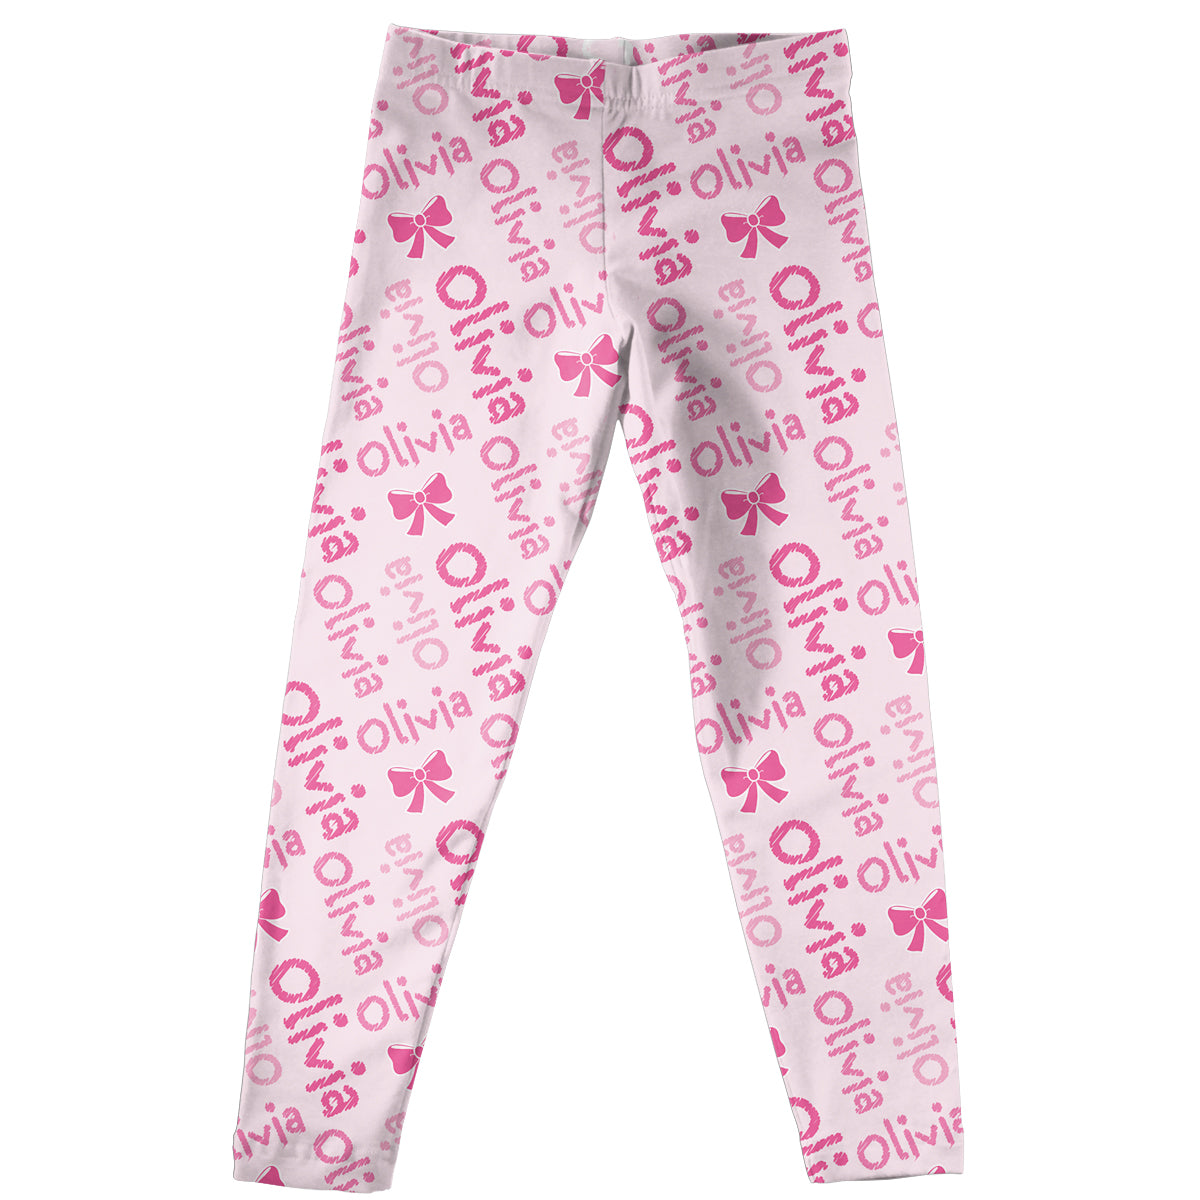 Bow and Personalized Name Print Pink Leggings - Wimziy&Co.